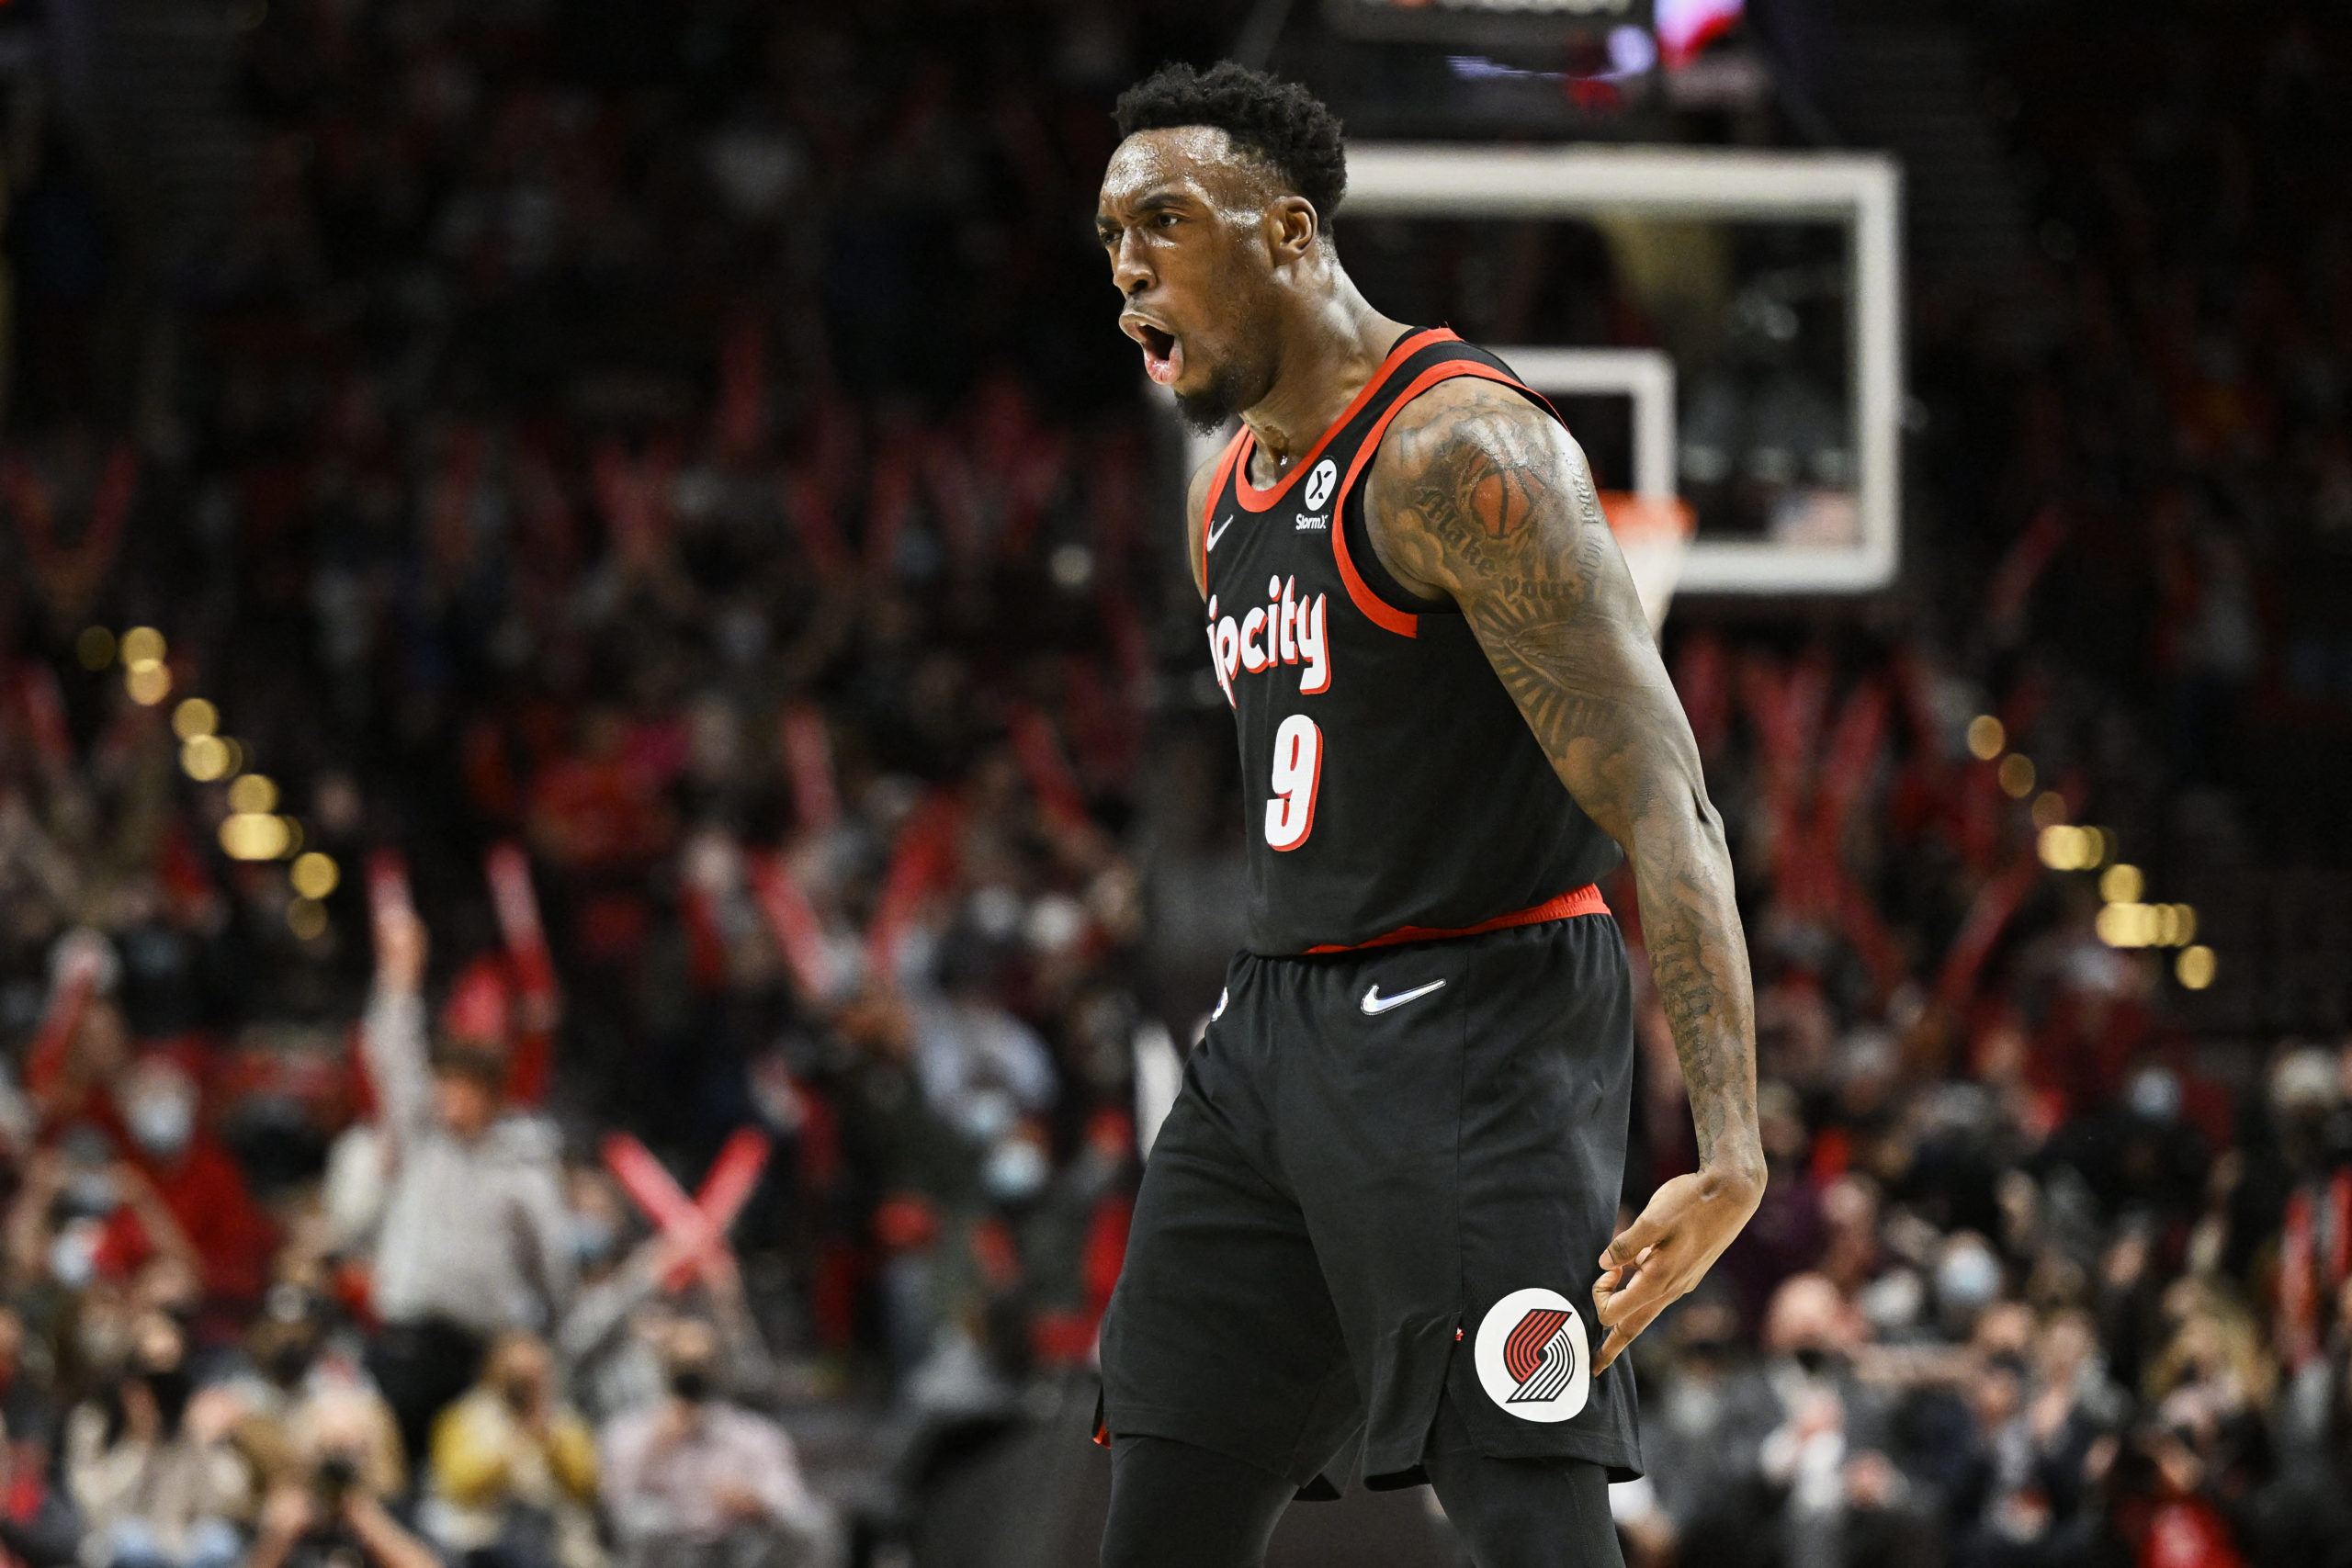 Portland Trail Blazers forward Nassir Little (9) celebrates after scoring a three point shot during the second half against the Brooklyn Nets at Moda Center. The Trail Blazers won the game 114-108.